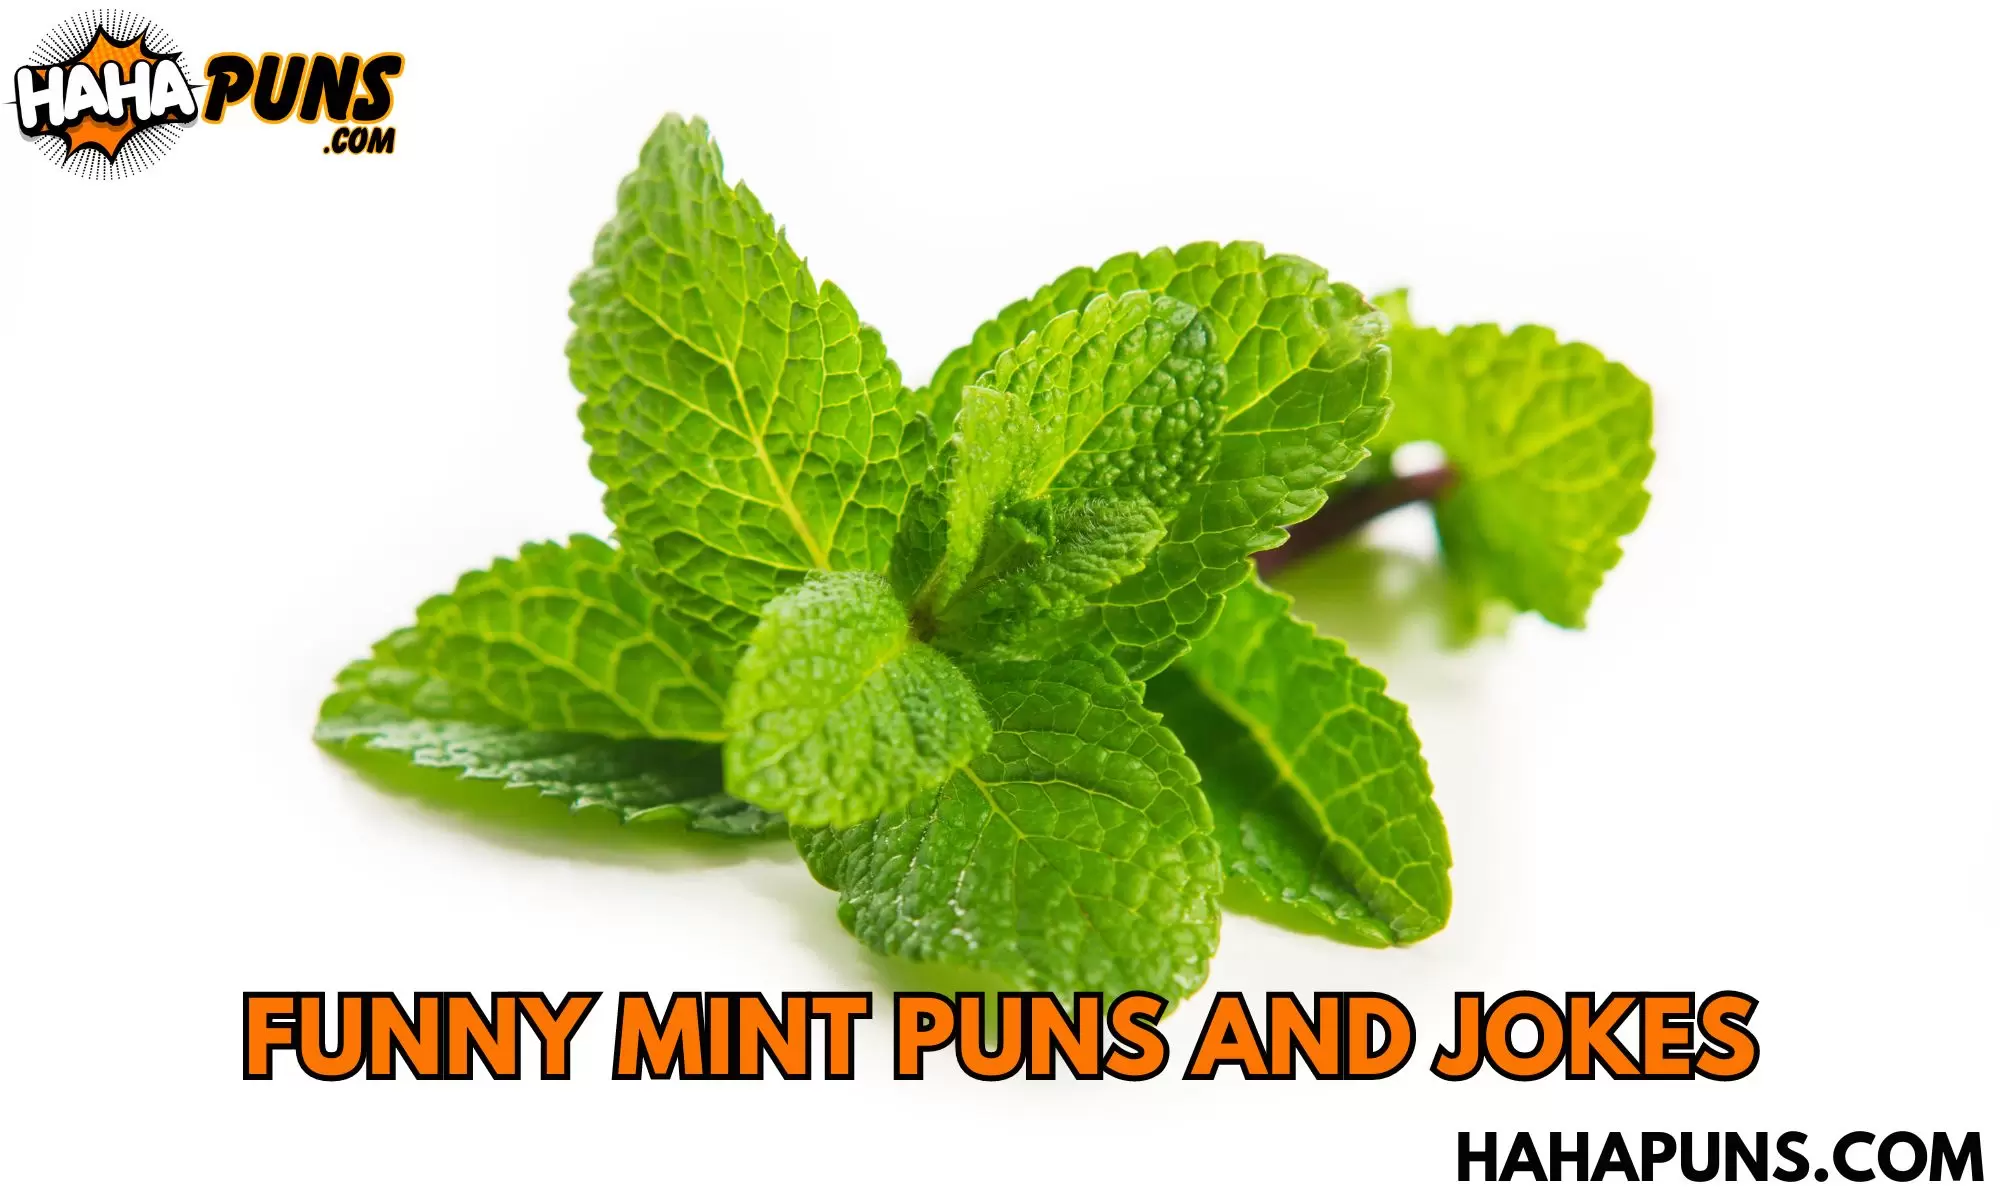 Funny Mint Puns And Jokes